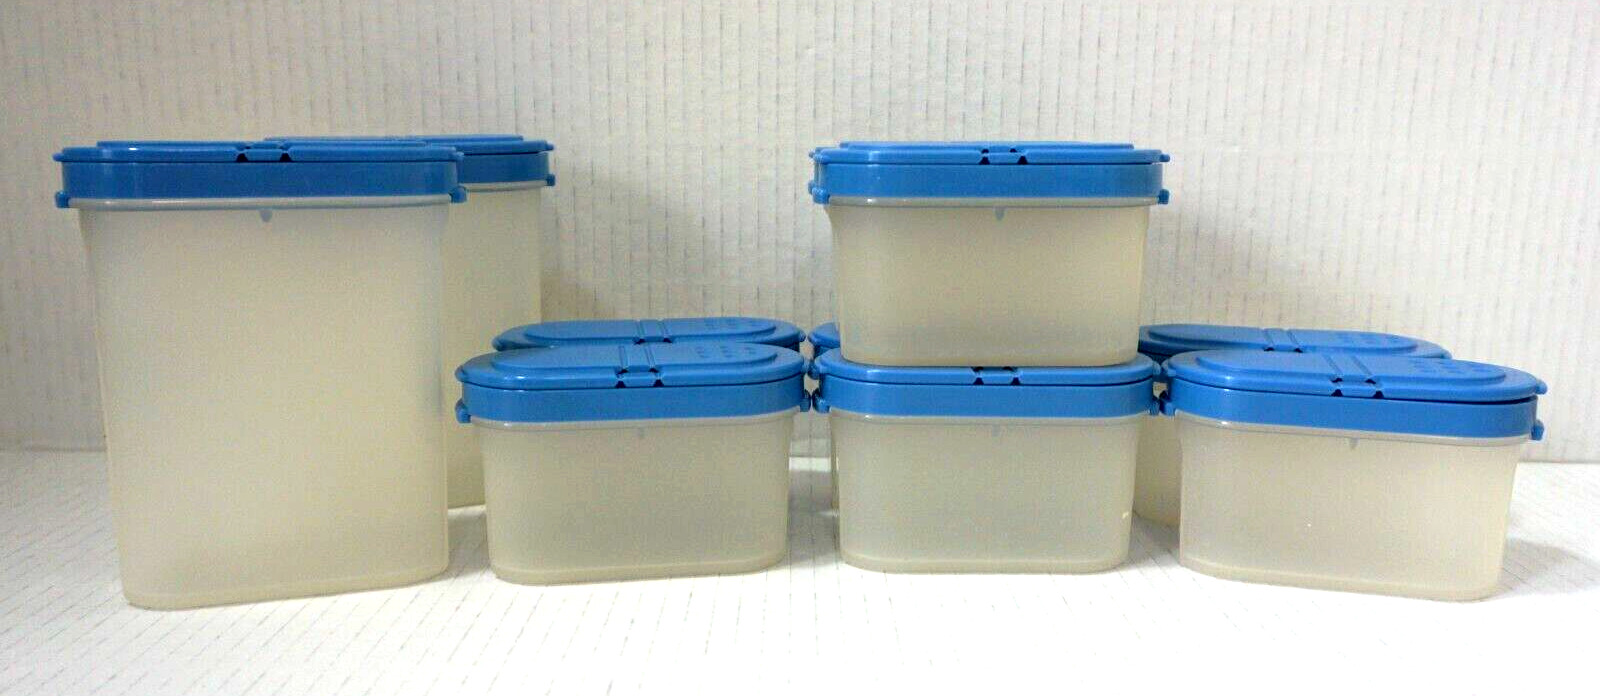 Vintage Tupperware Modular Mates Lot of 10 Spice Containers 1843 Blue Lids